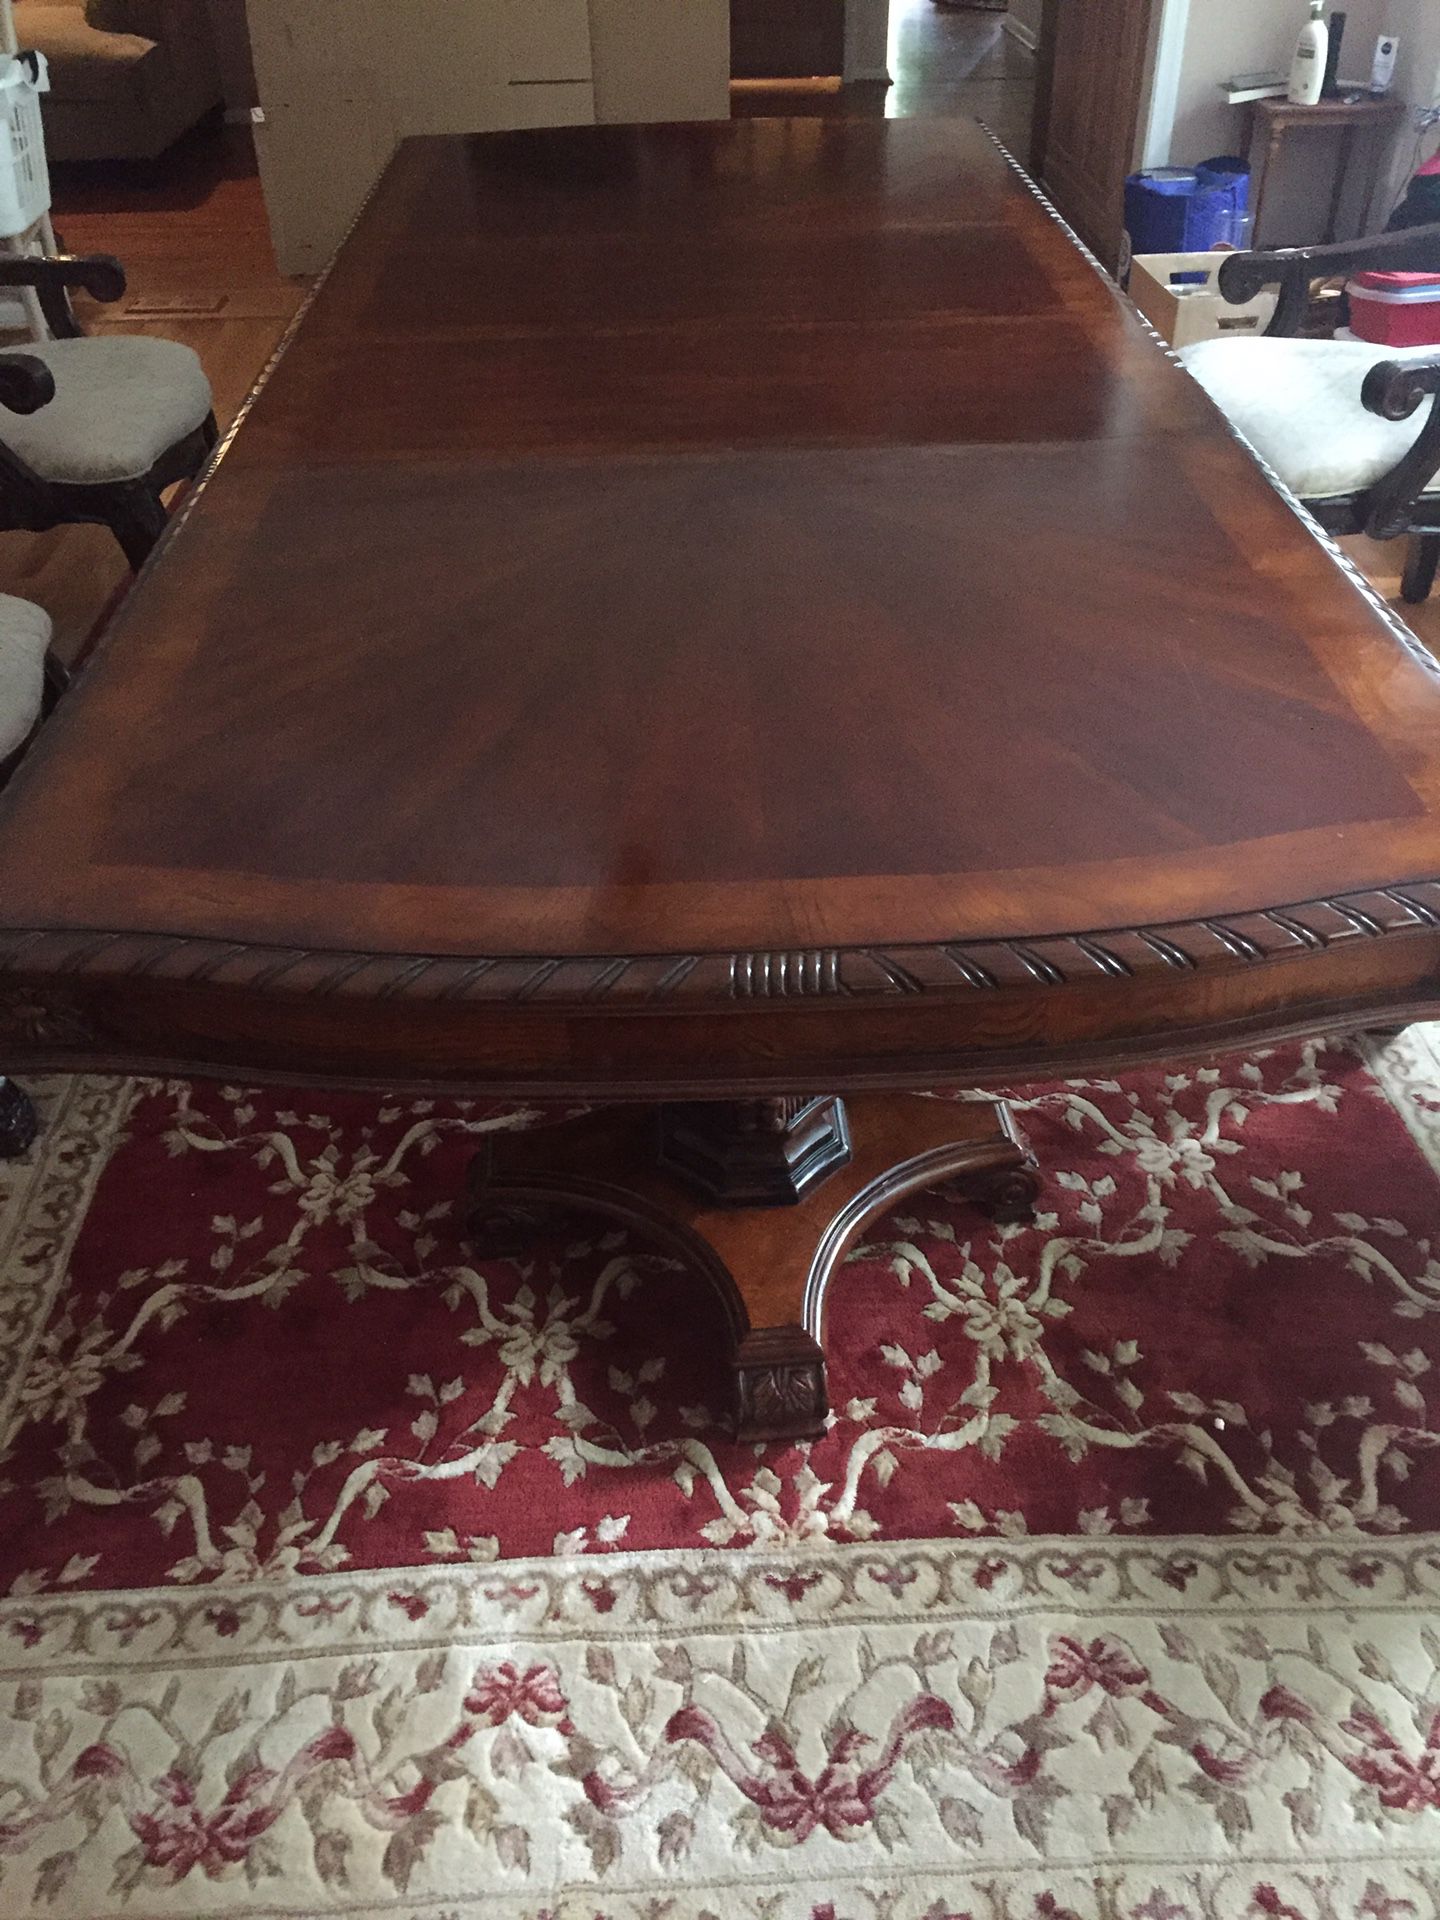 Solid Wood Rectangular Dining Table